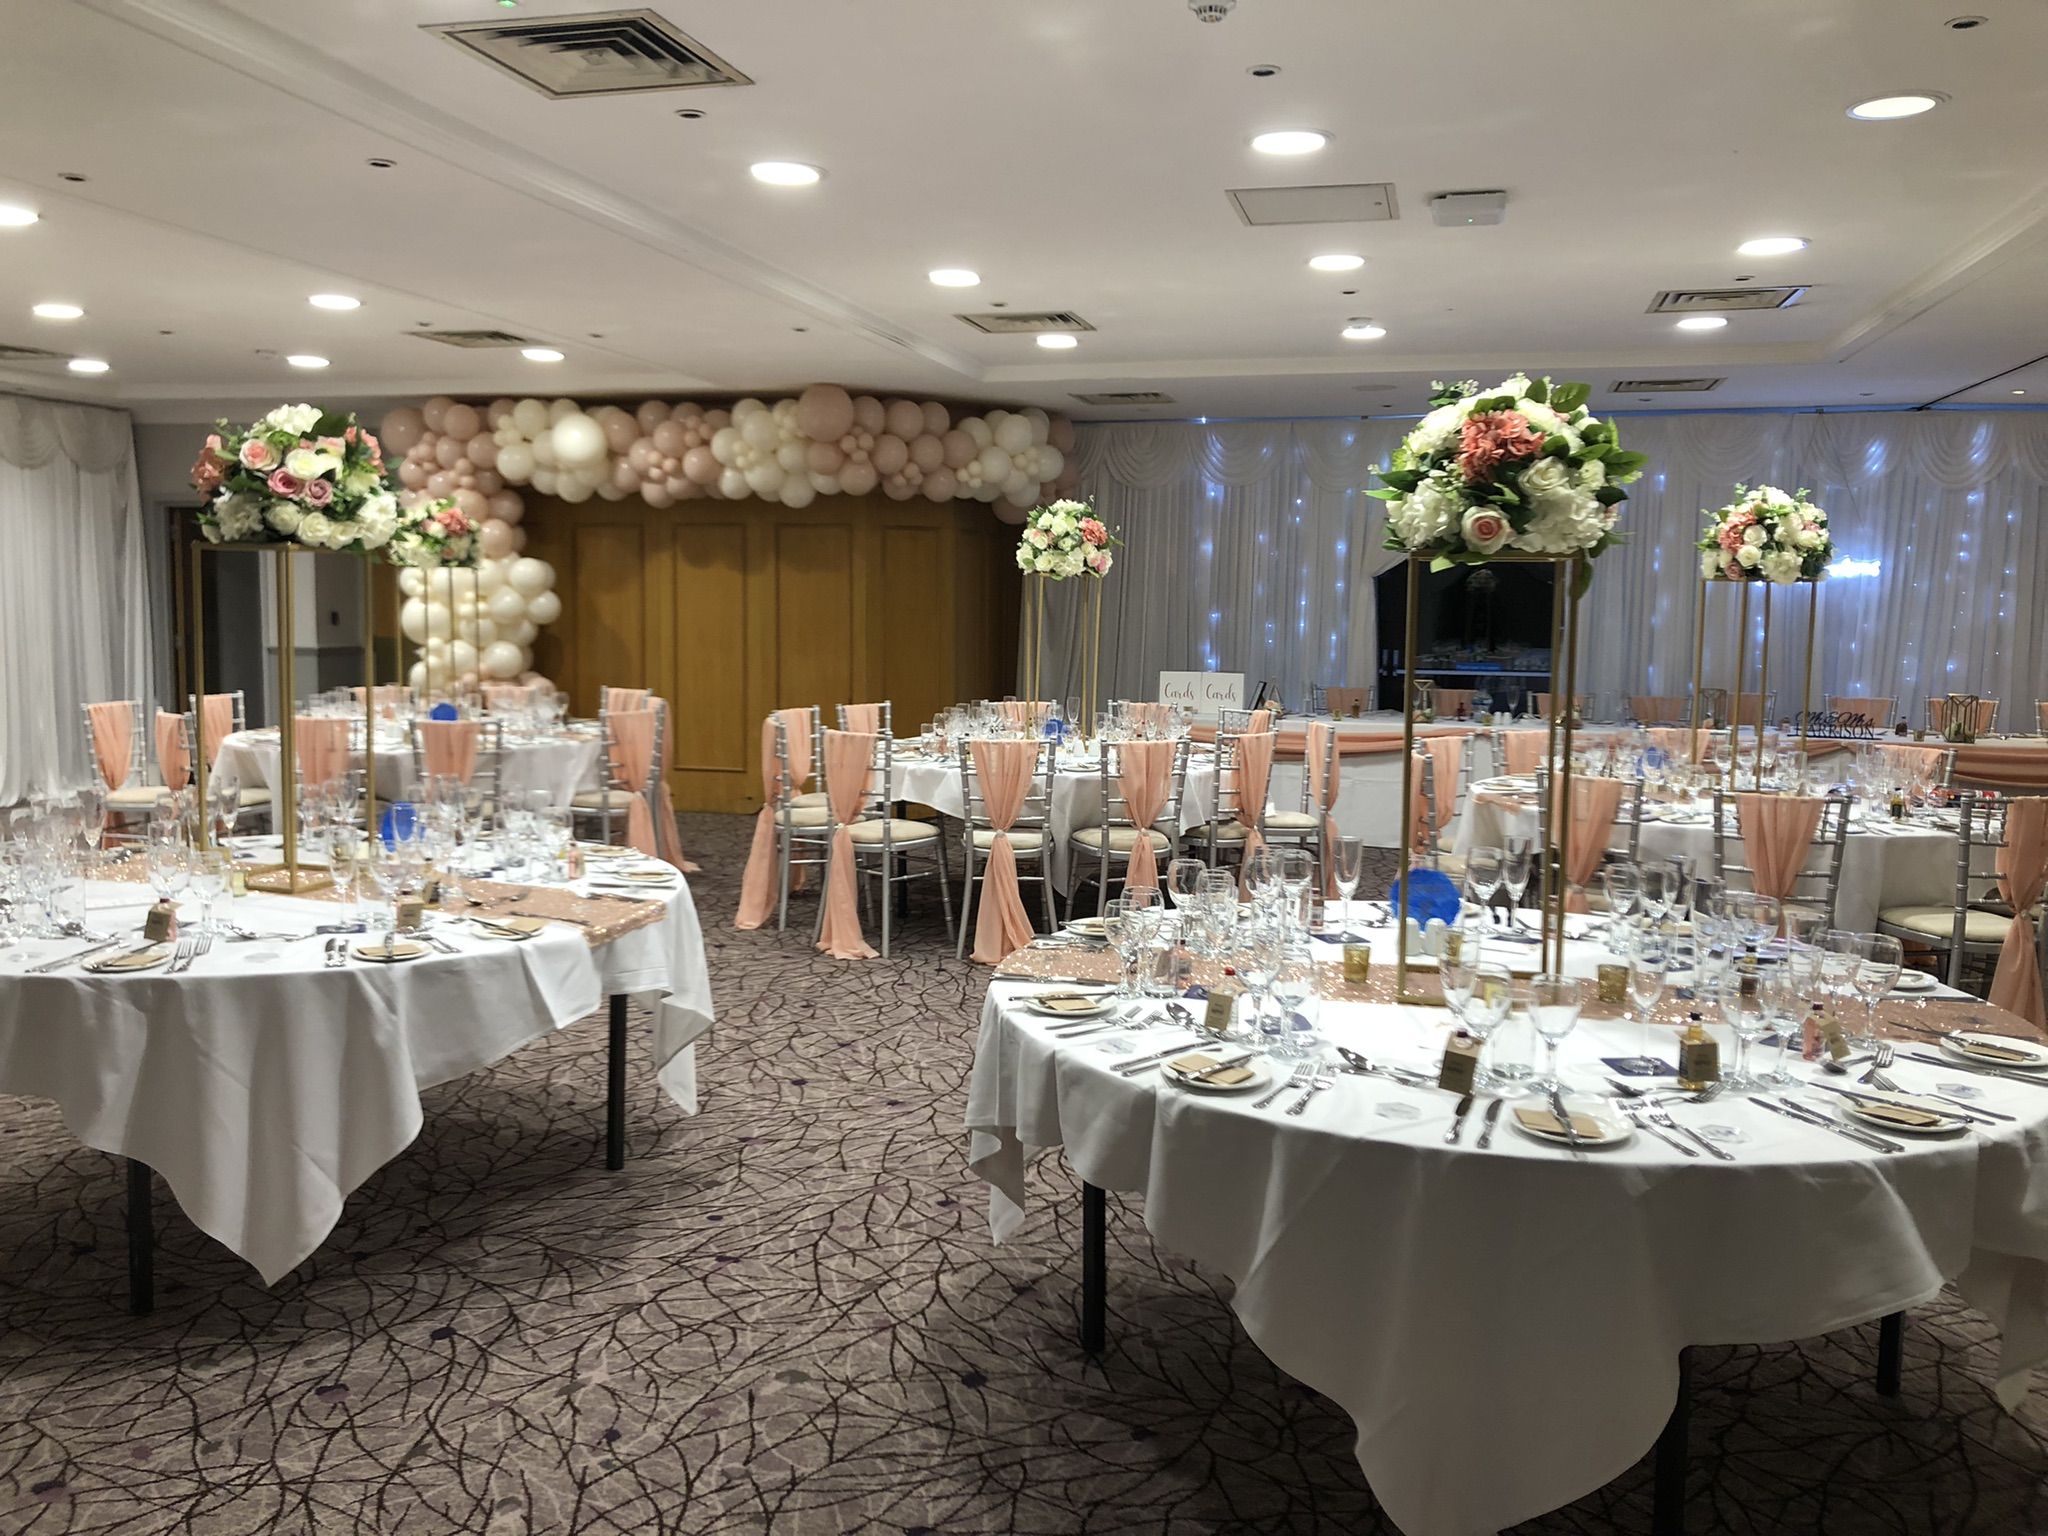 a banquet room set up for a formal function.